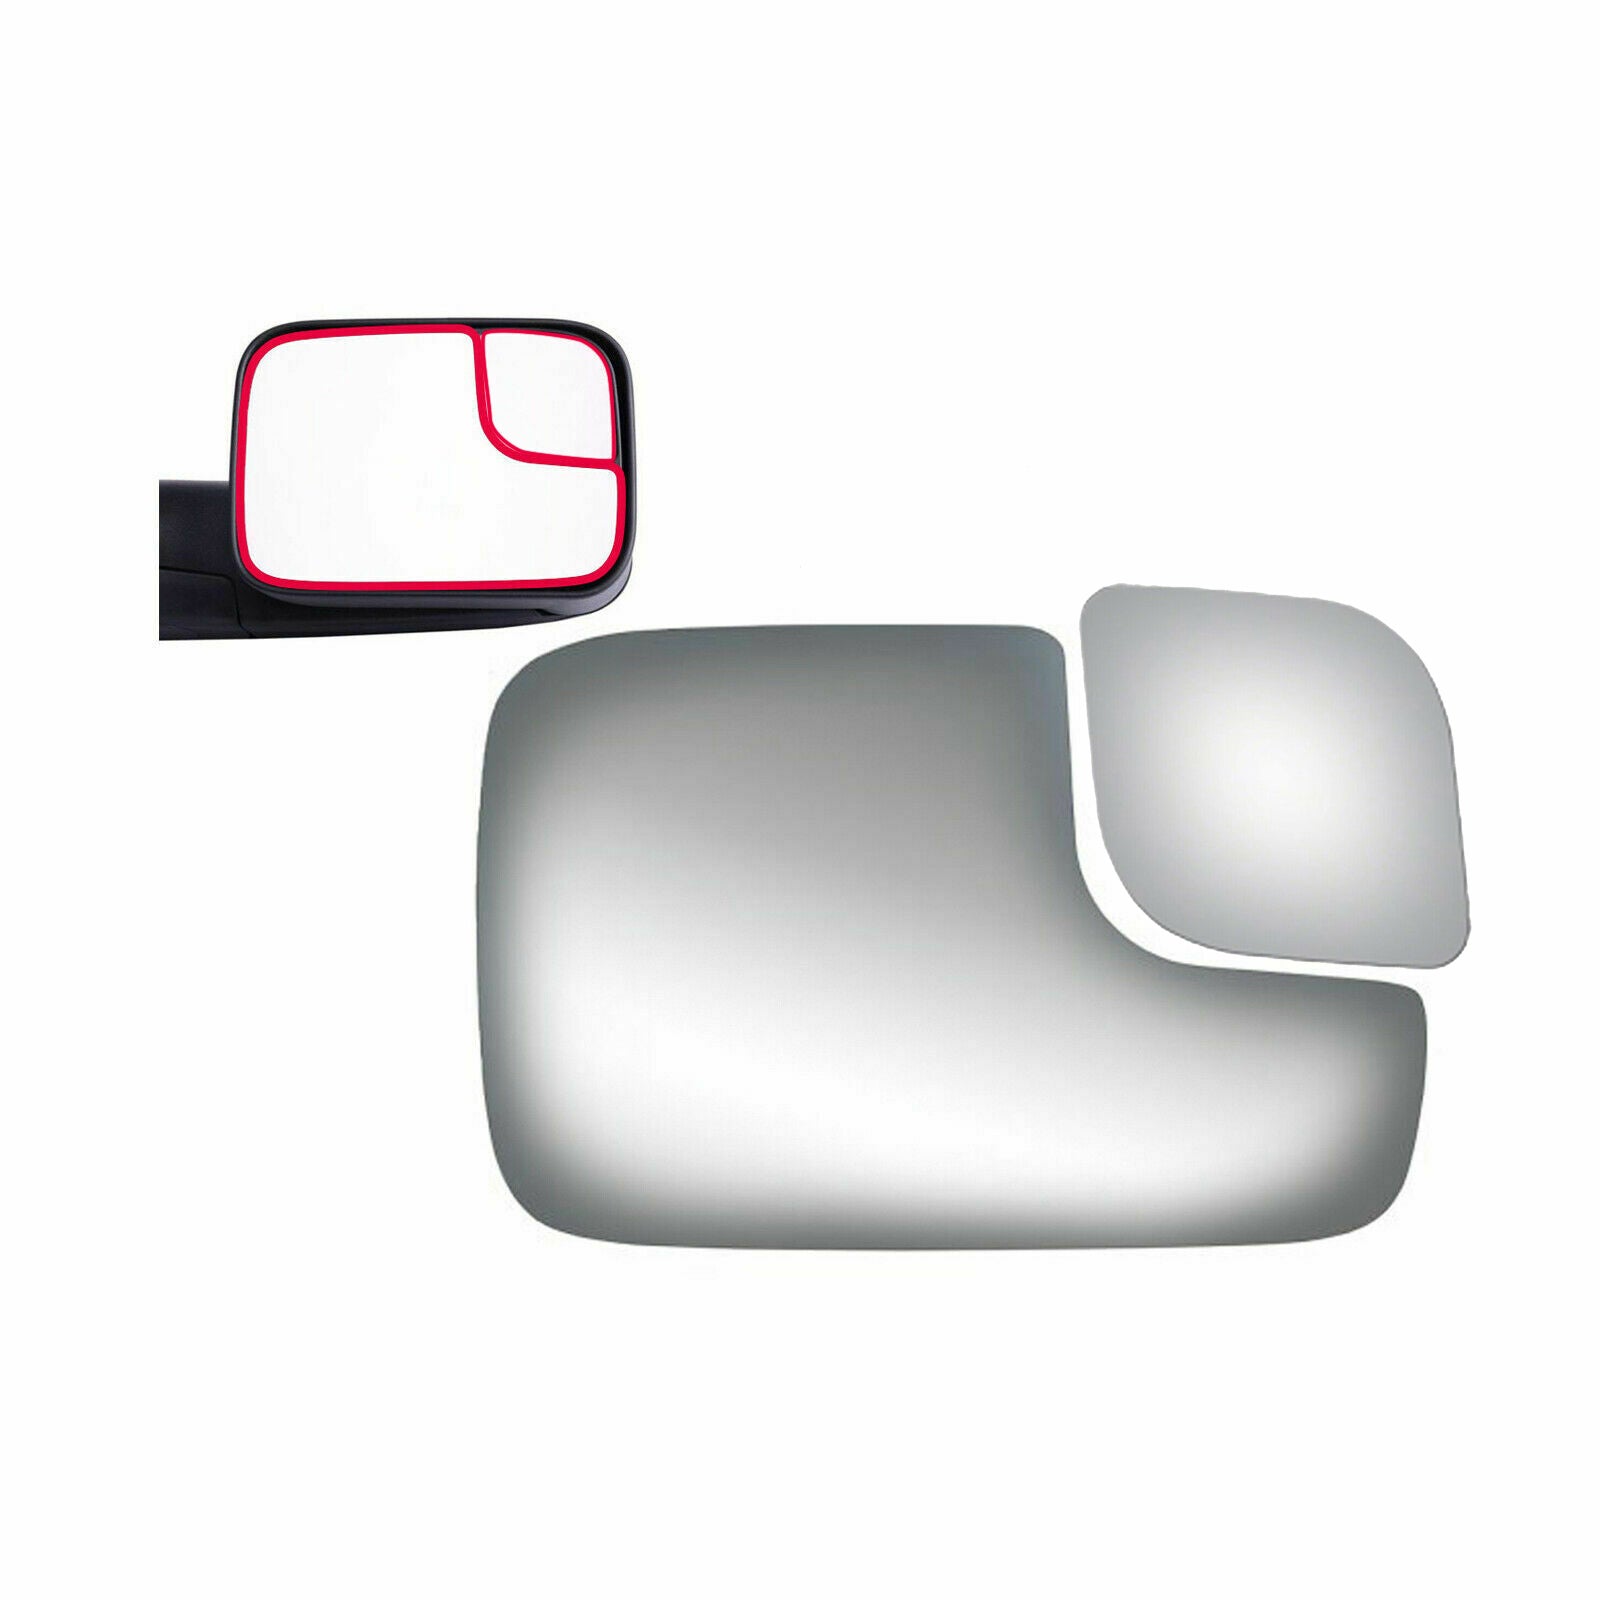 WLLW a pair of Towing Mirror Glass Replace for 1994-2009 Dodge Ram 1500 2500 3500, Driver Left Side LH/Passenger Right Side RH/The Both Sides Upper&Lower Flat Convex D-0014